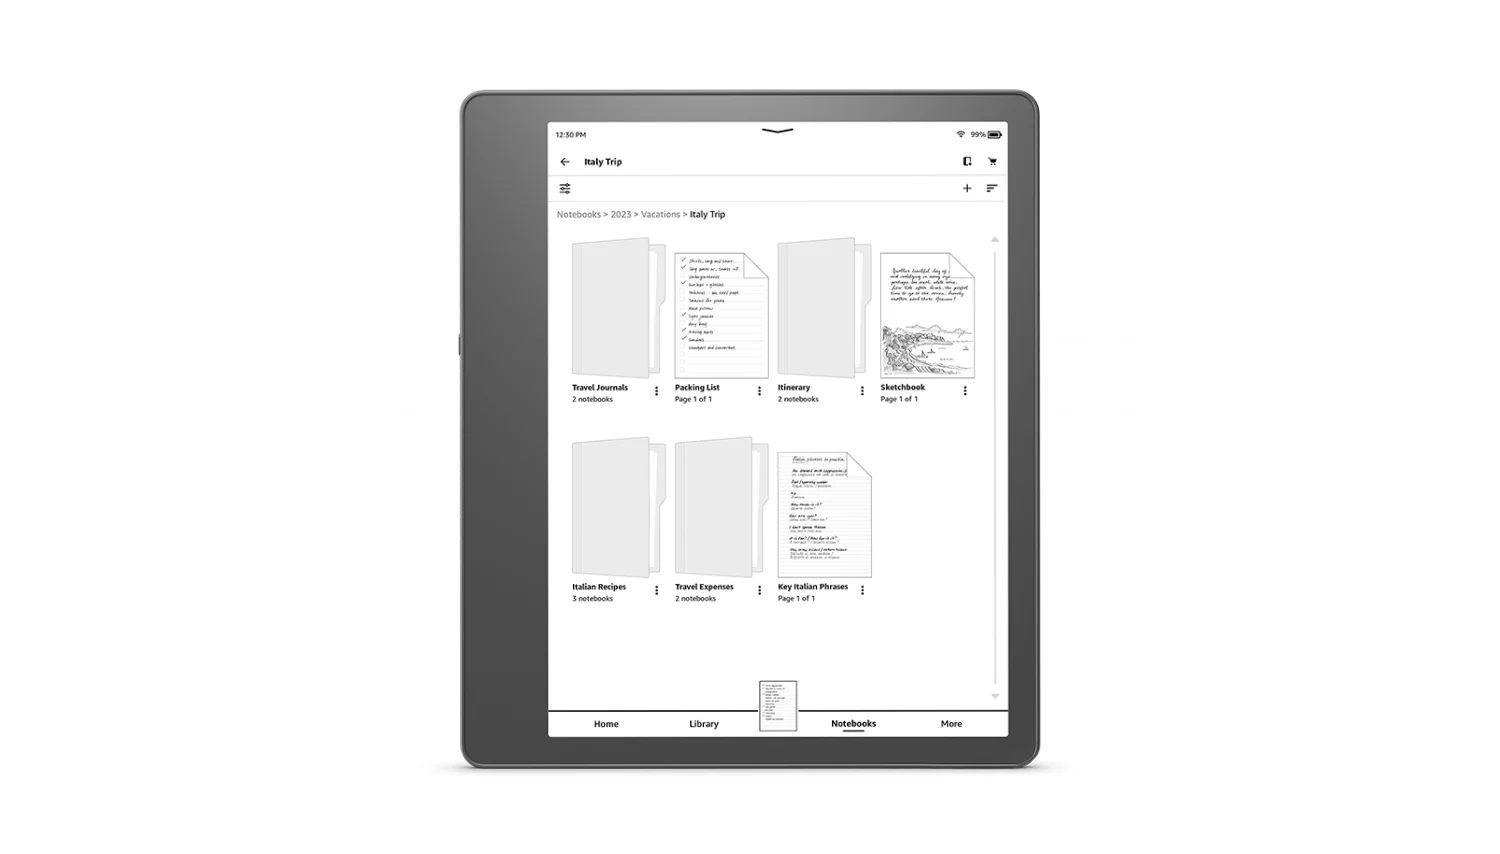 Kindle Scribe product photo showing a screen with folders and subfolders.